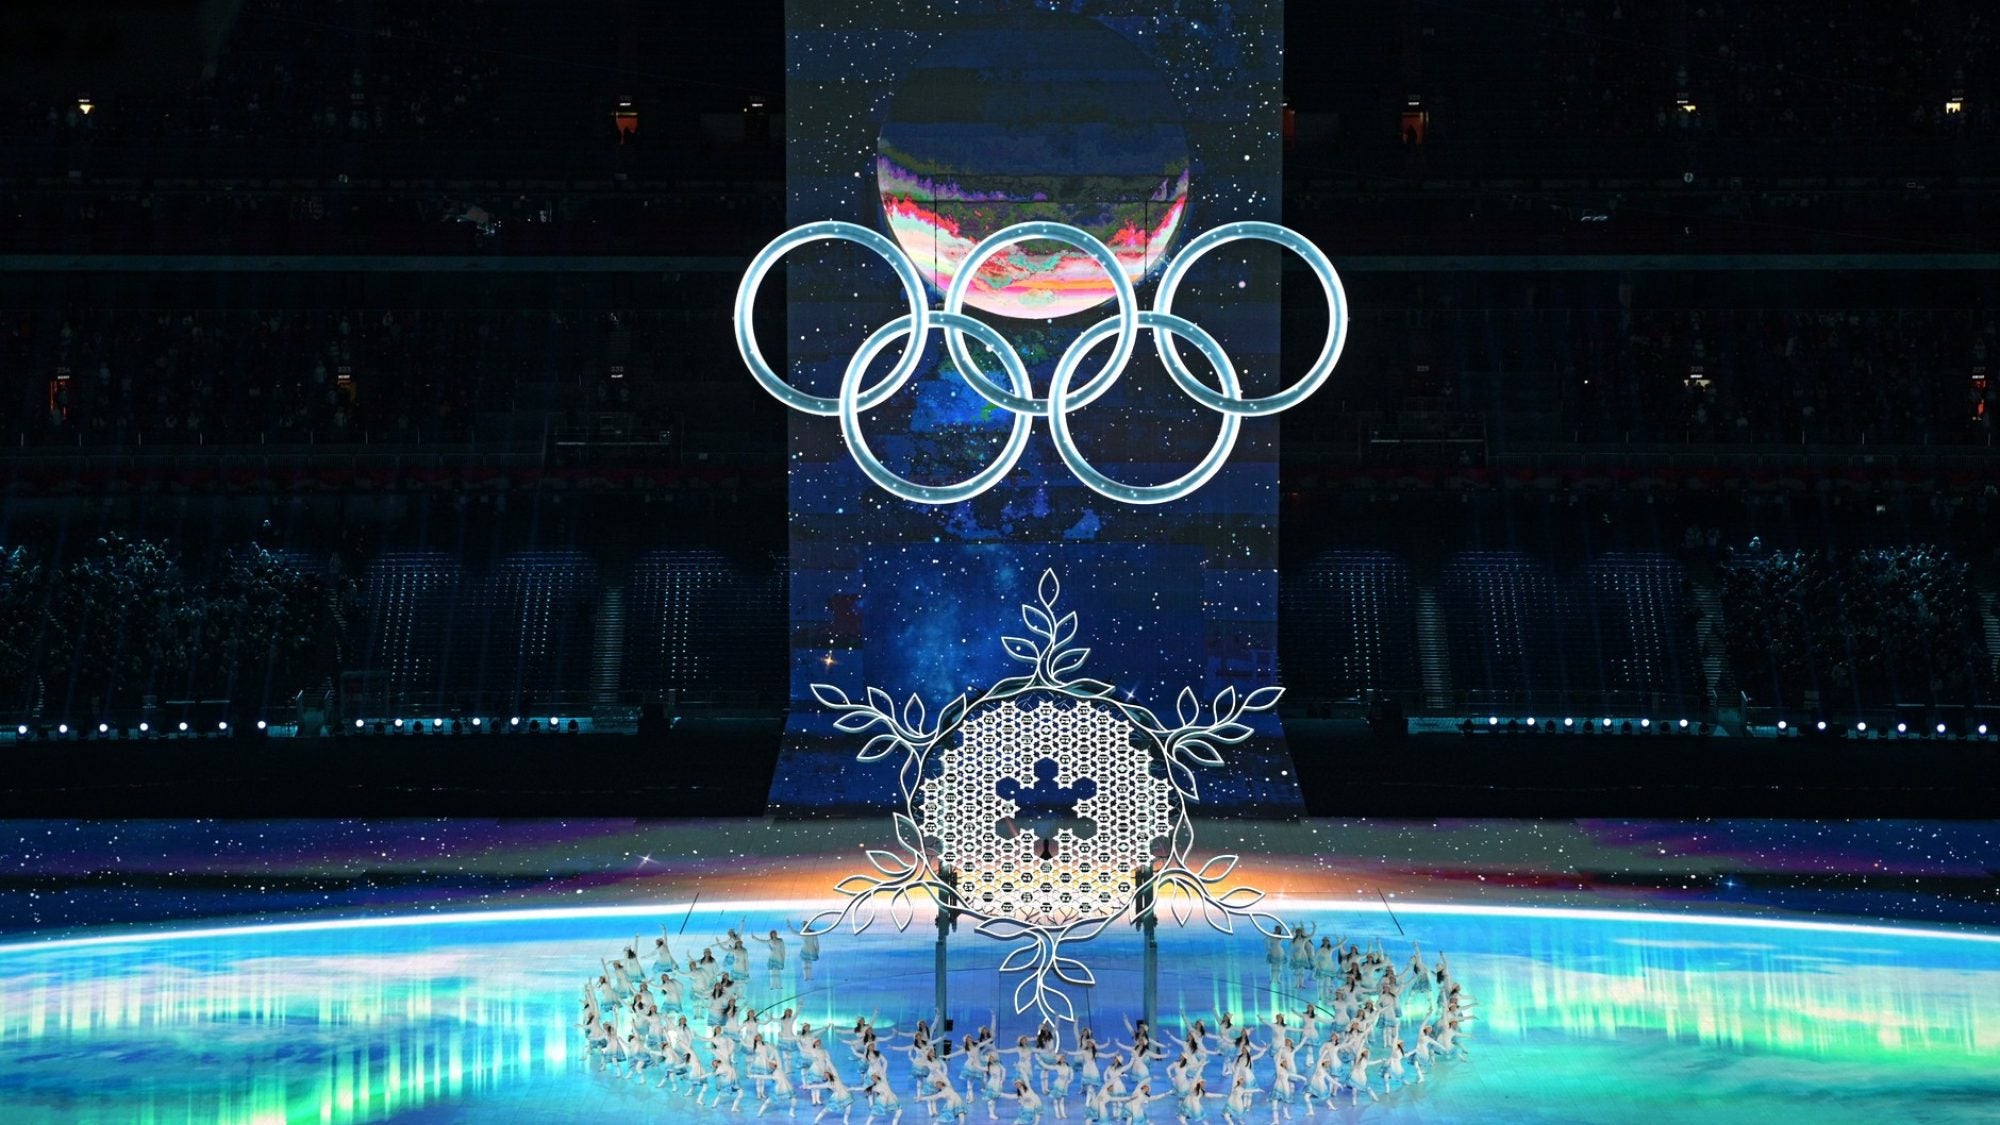 Fears China will play games with the 2022 Winter Olympics